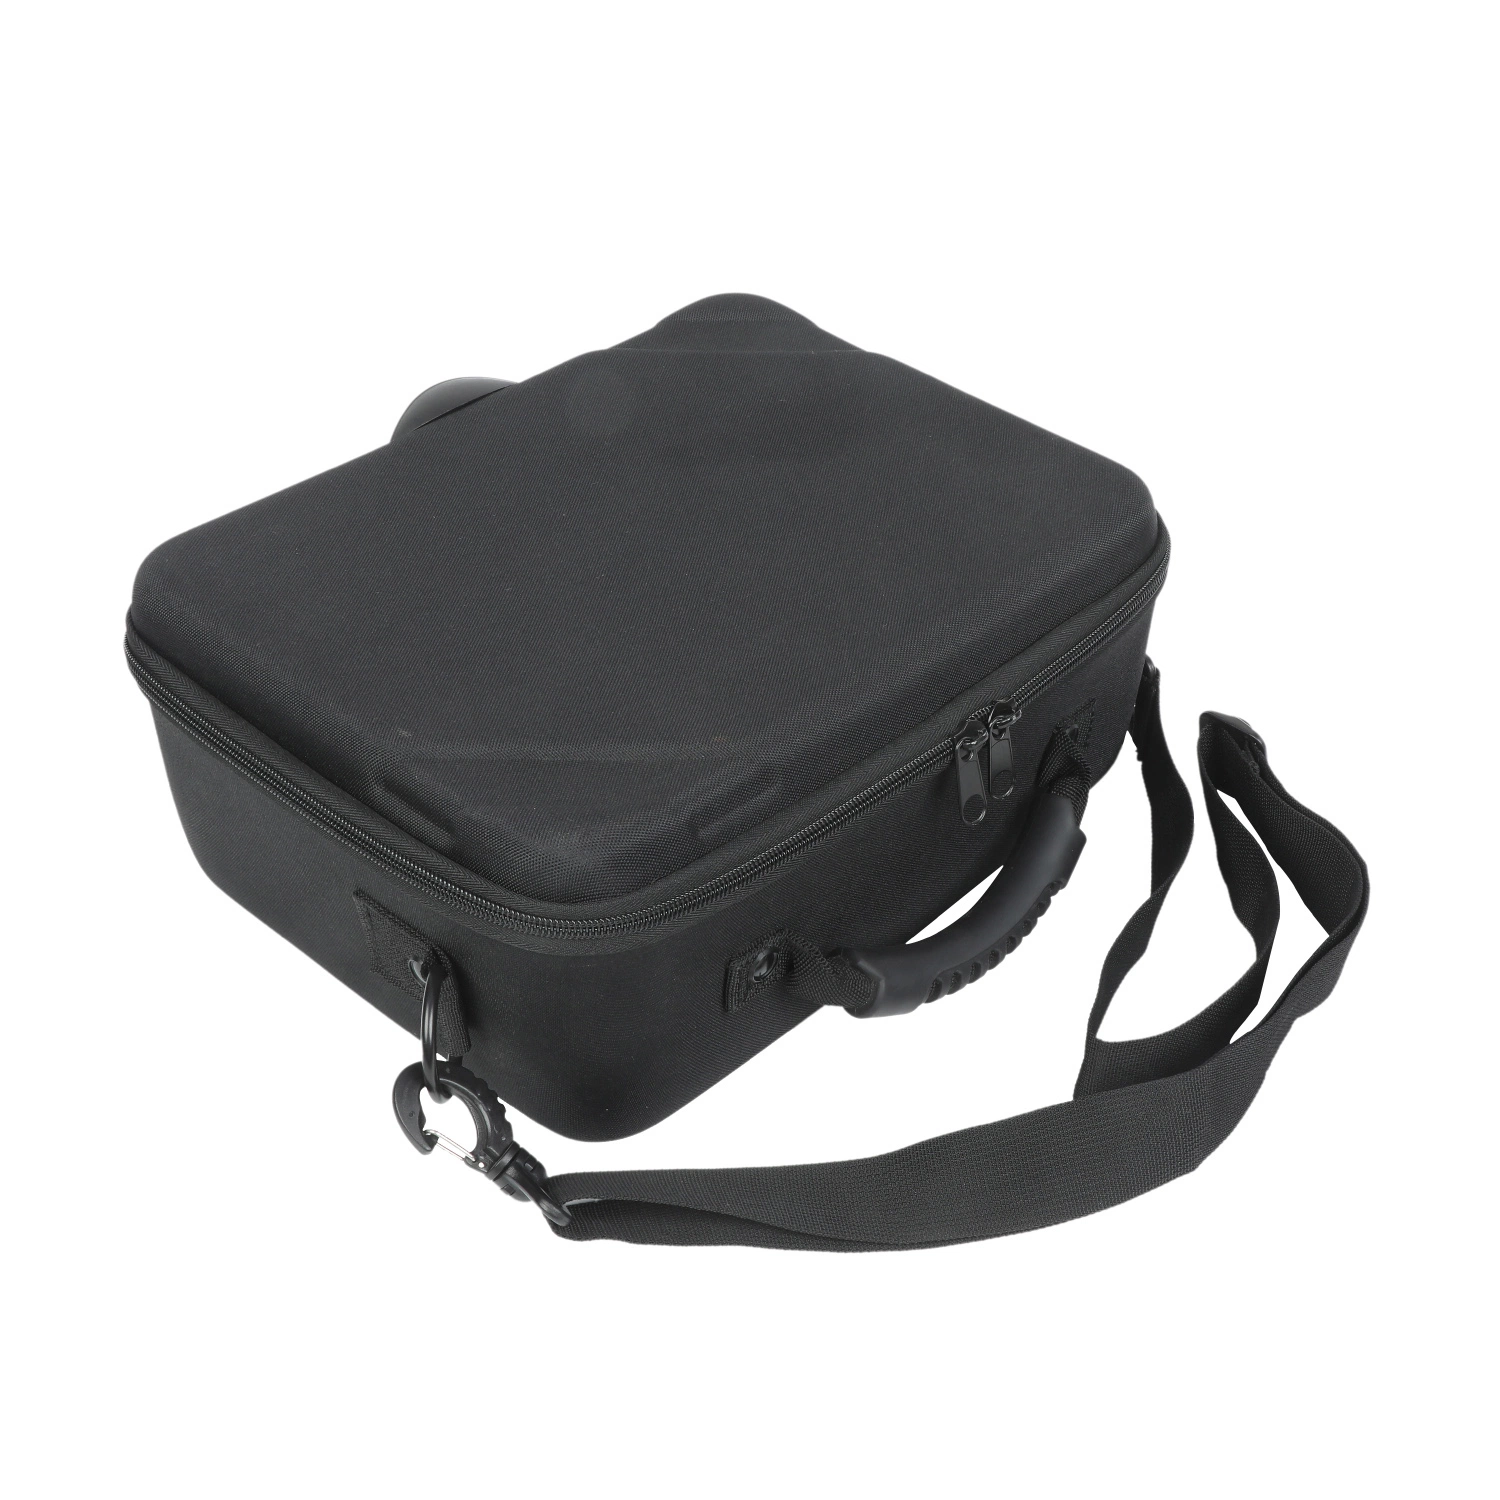 Other Special Purpose Medical Bags Small Hard EVA Case Box